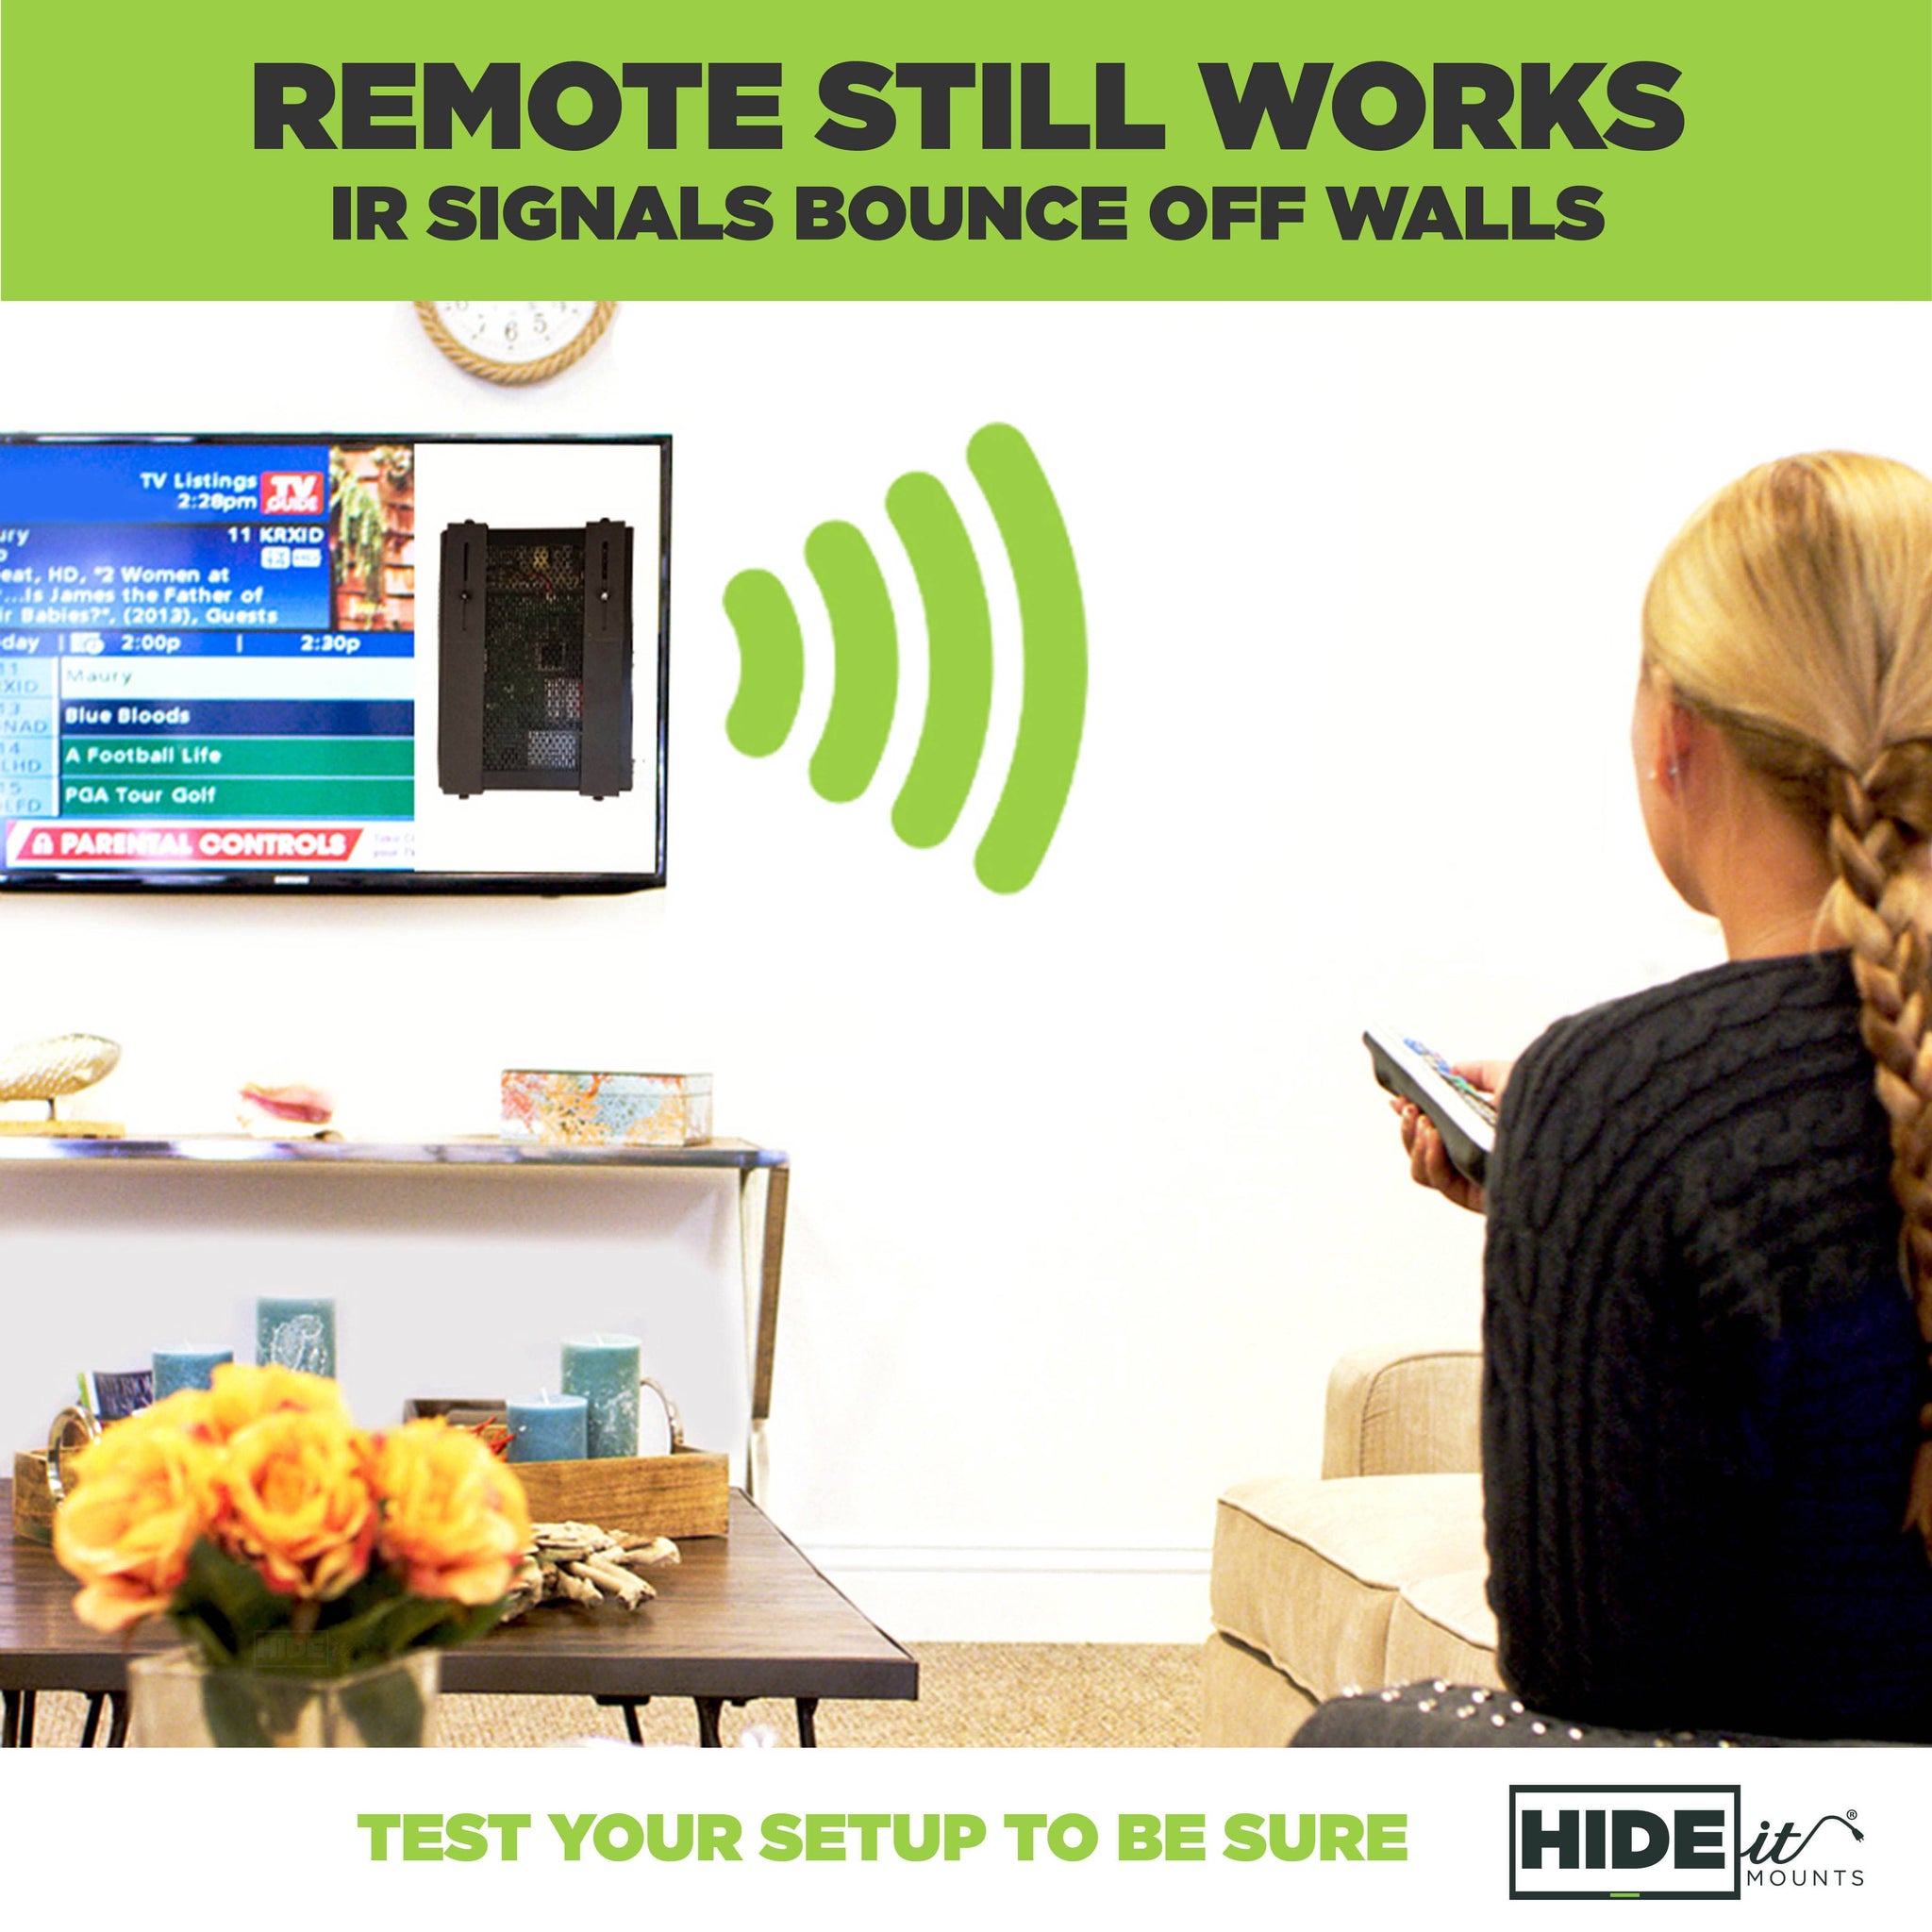 Remote still works. IR signals bounce off walls. Test your setup to be sure. Woman using tv remote.